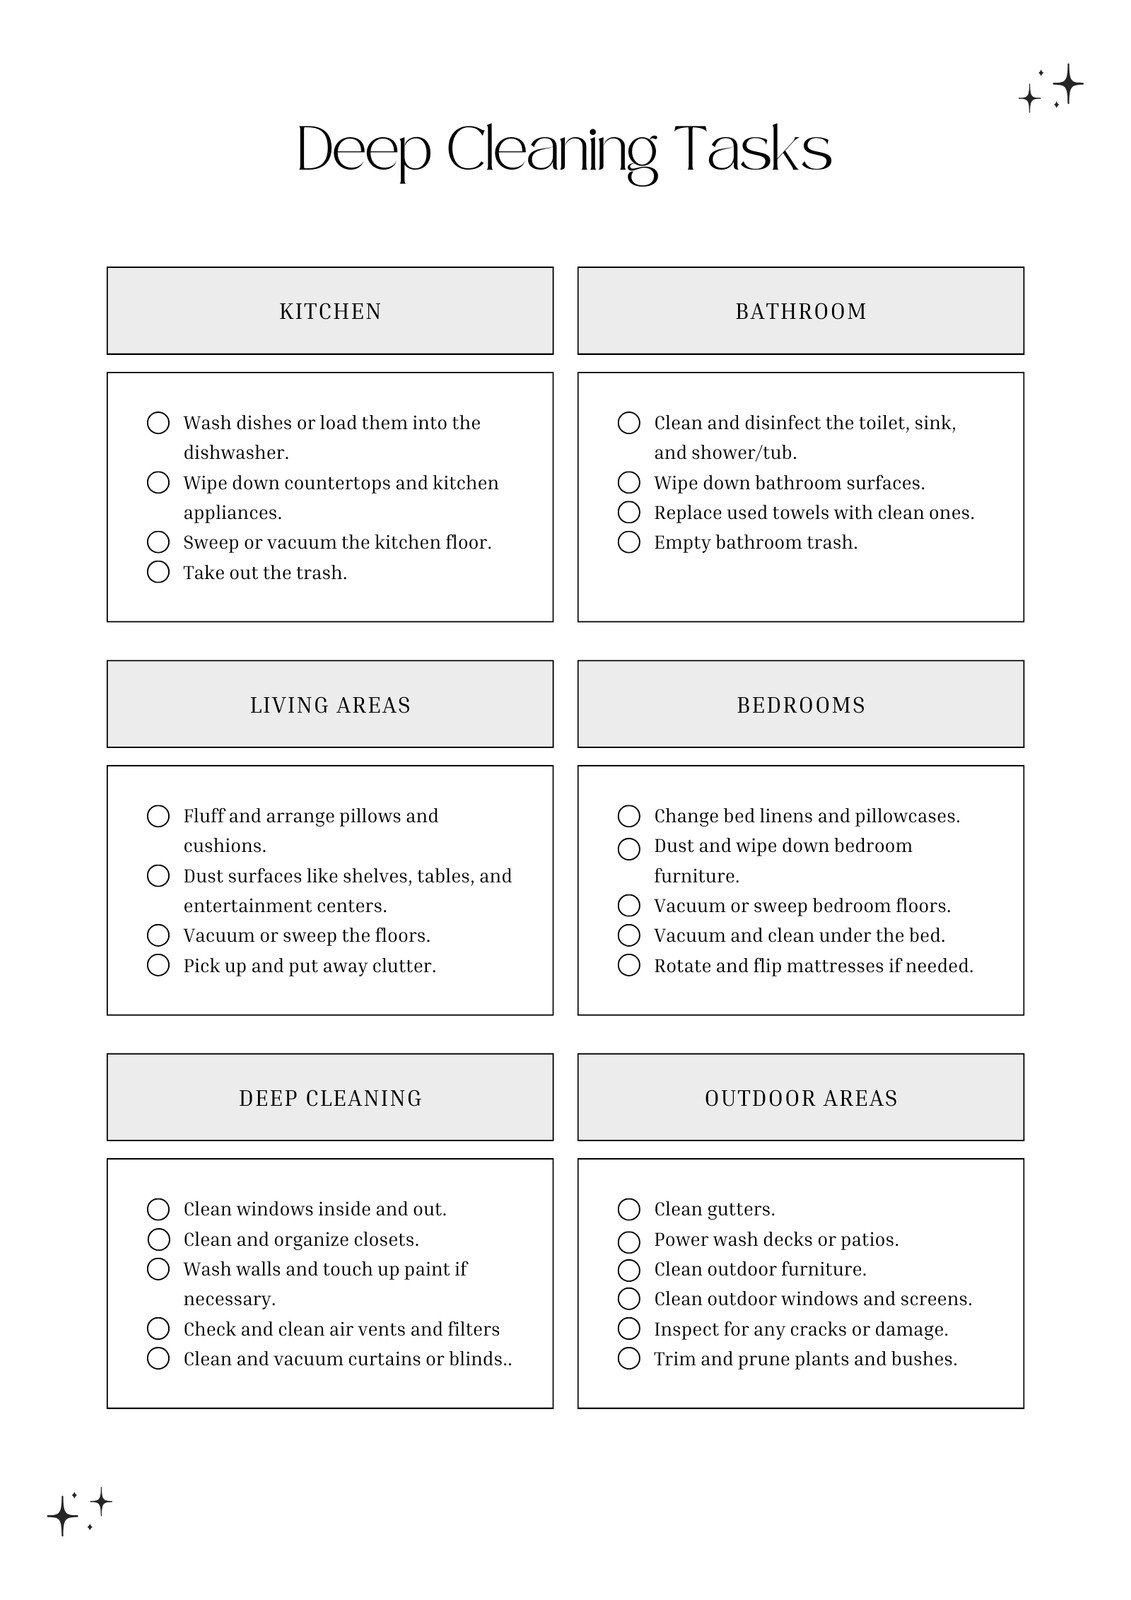 Speed Cleaning Checklist, Printable Speed Cleaning Checklist, Power Hour  Printable, Cleaning Planner, Speed Clean Checklist, ADHD Planner 